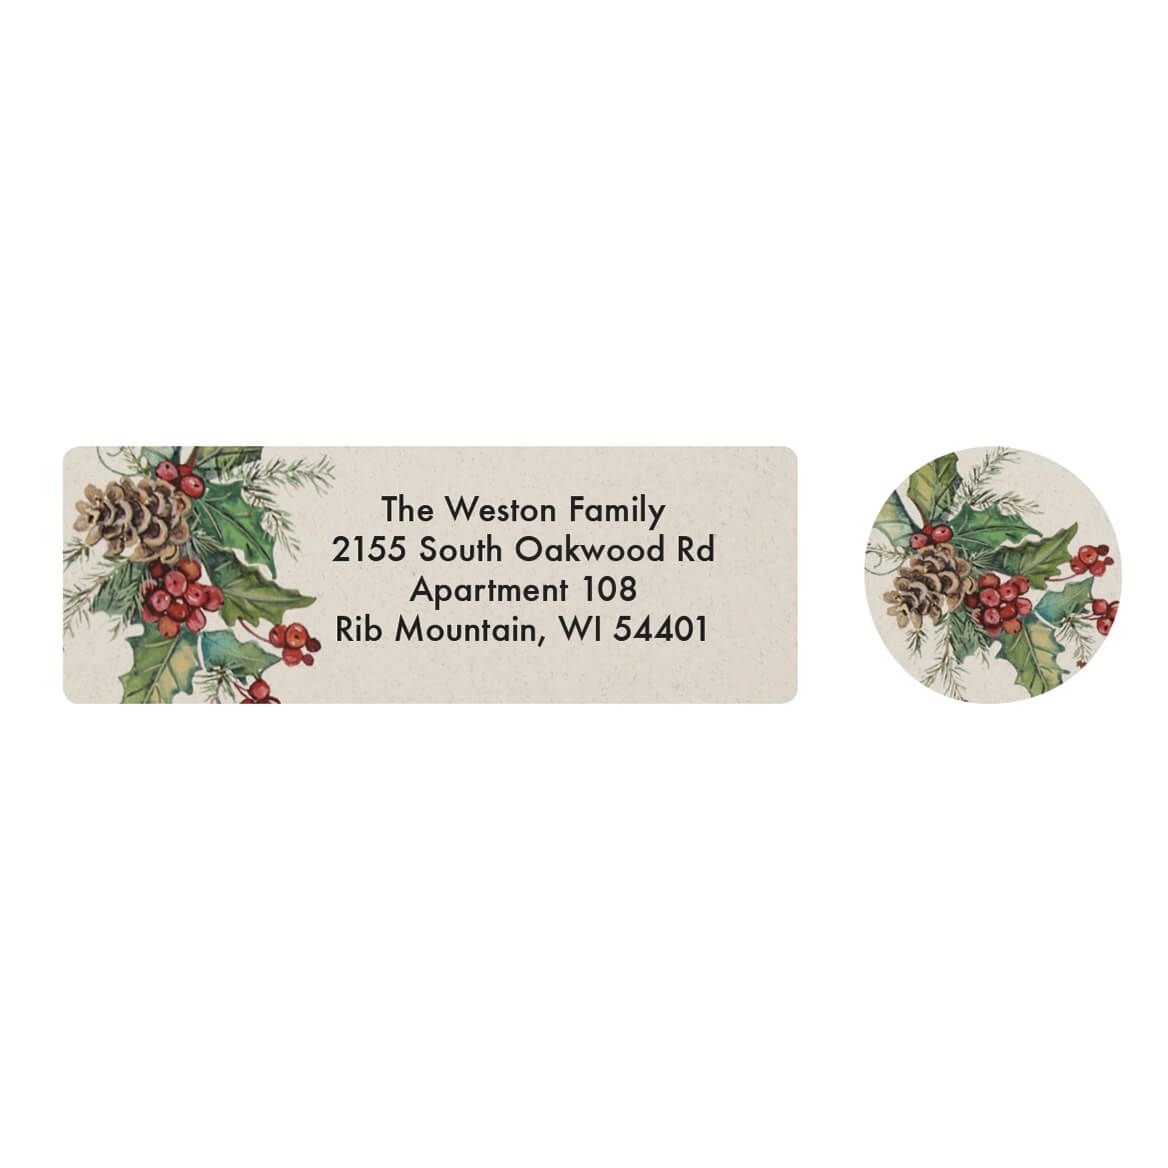 Personalized Looking for Jesus Address Labels & Seals 20 + '-' + 364702